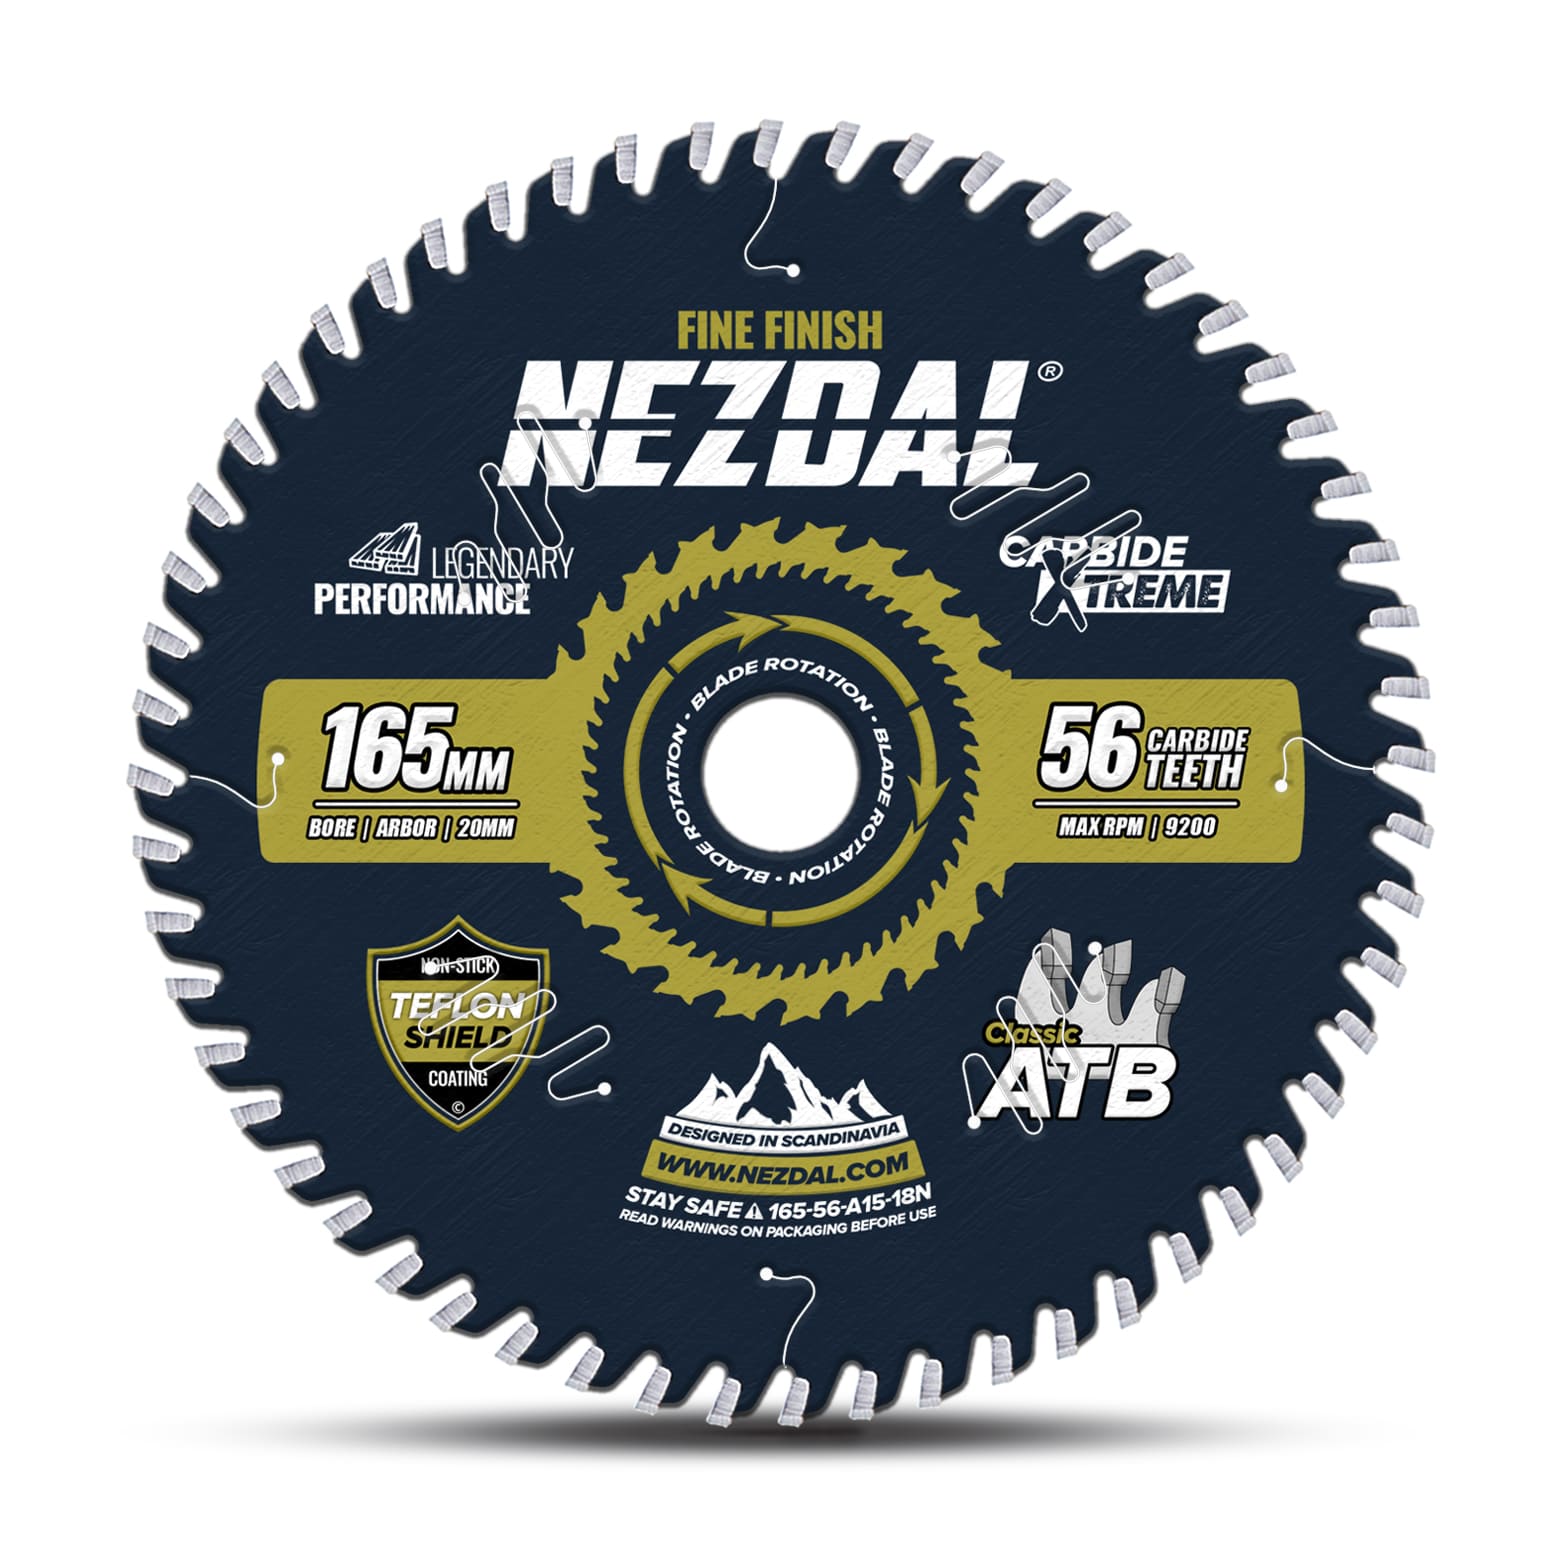 165mm circular saw blade with 56 teeth for fine finish in wood